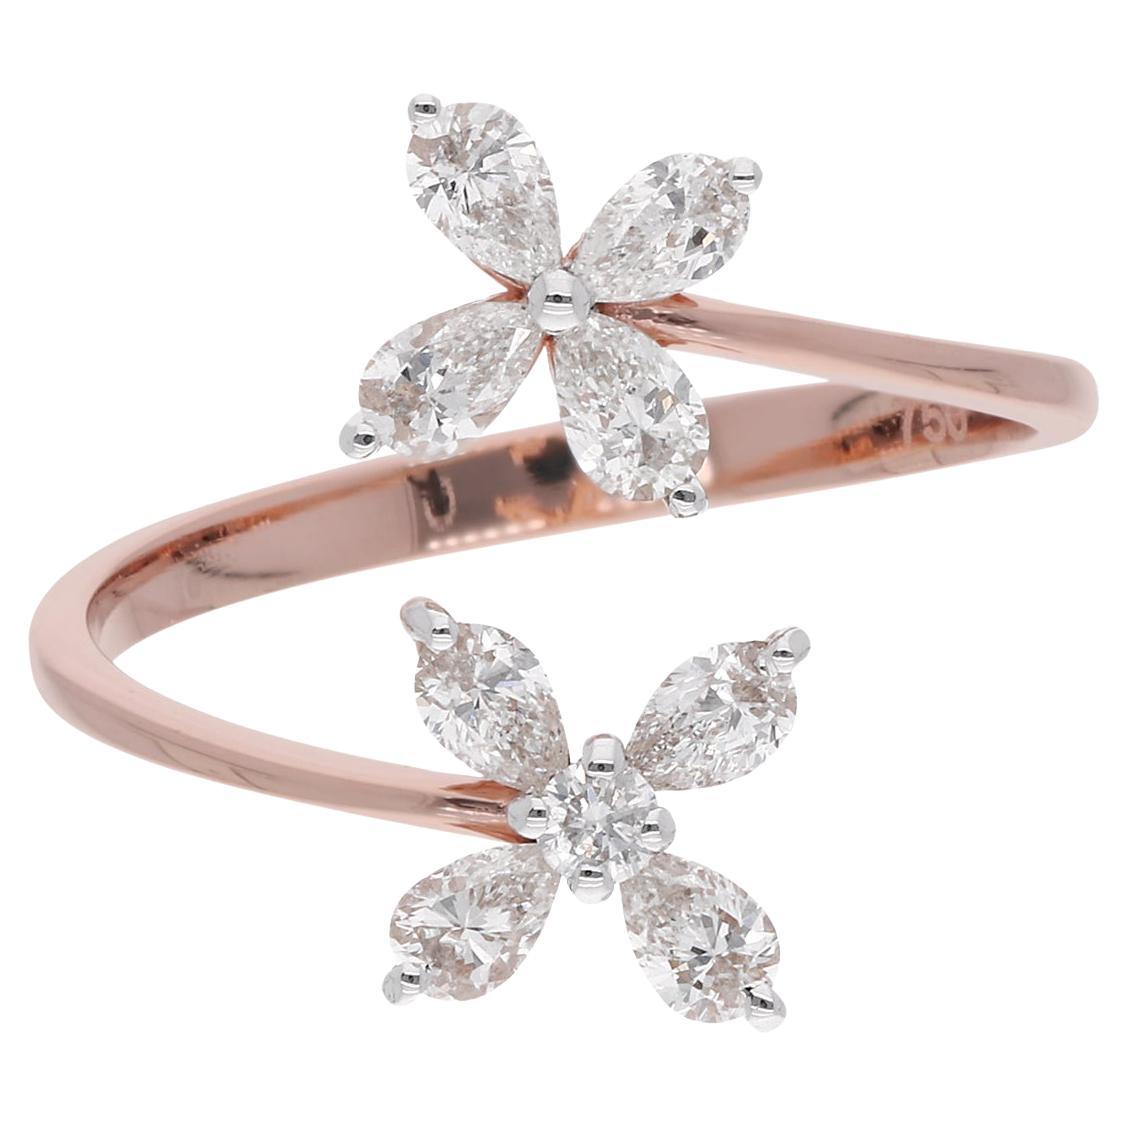 Real 0.74 Carat SI Clarity HI Color Pear Diamond Flower Ring 14 Karat White Gold For Sale